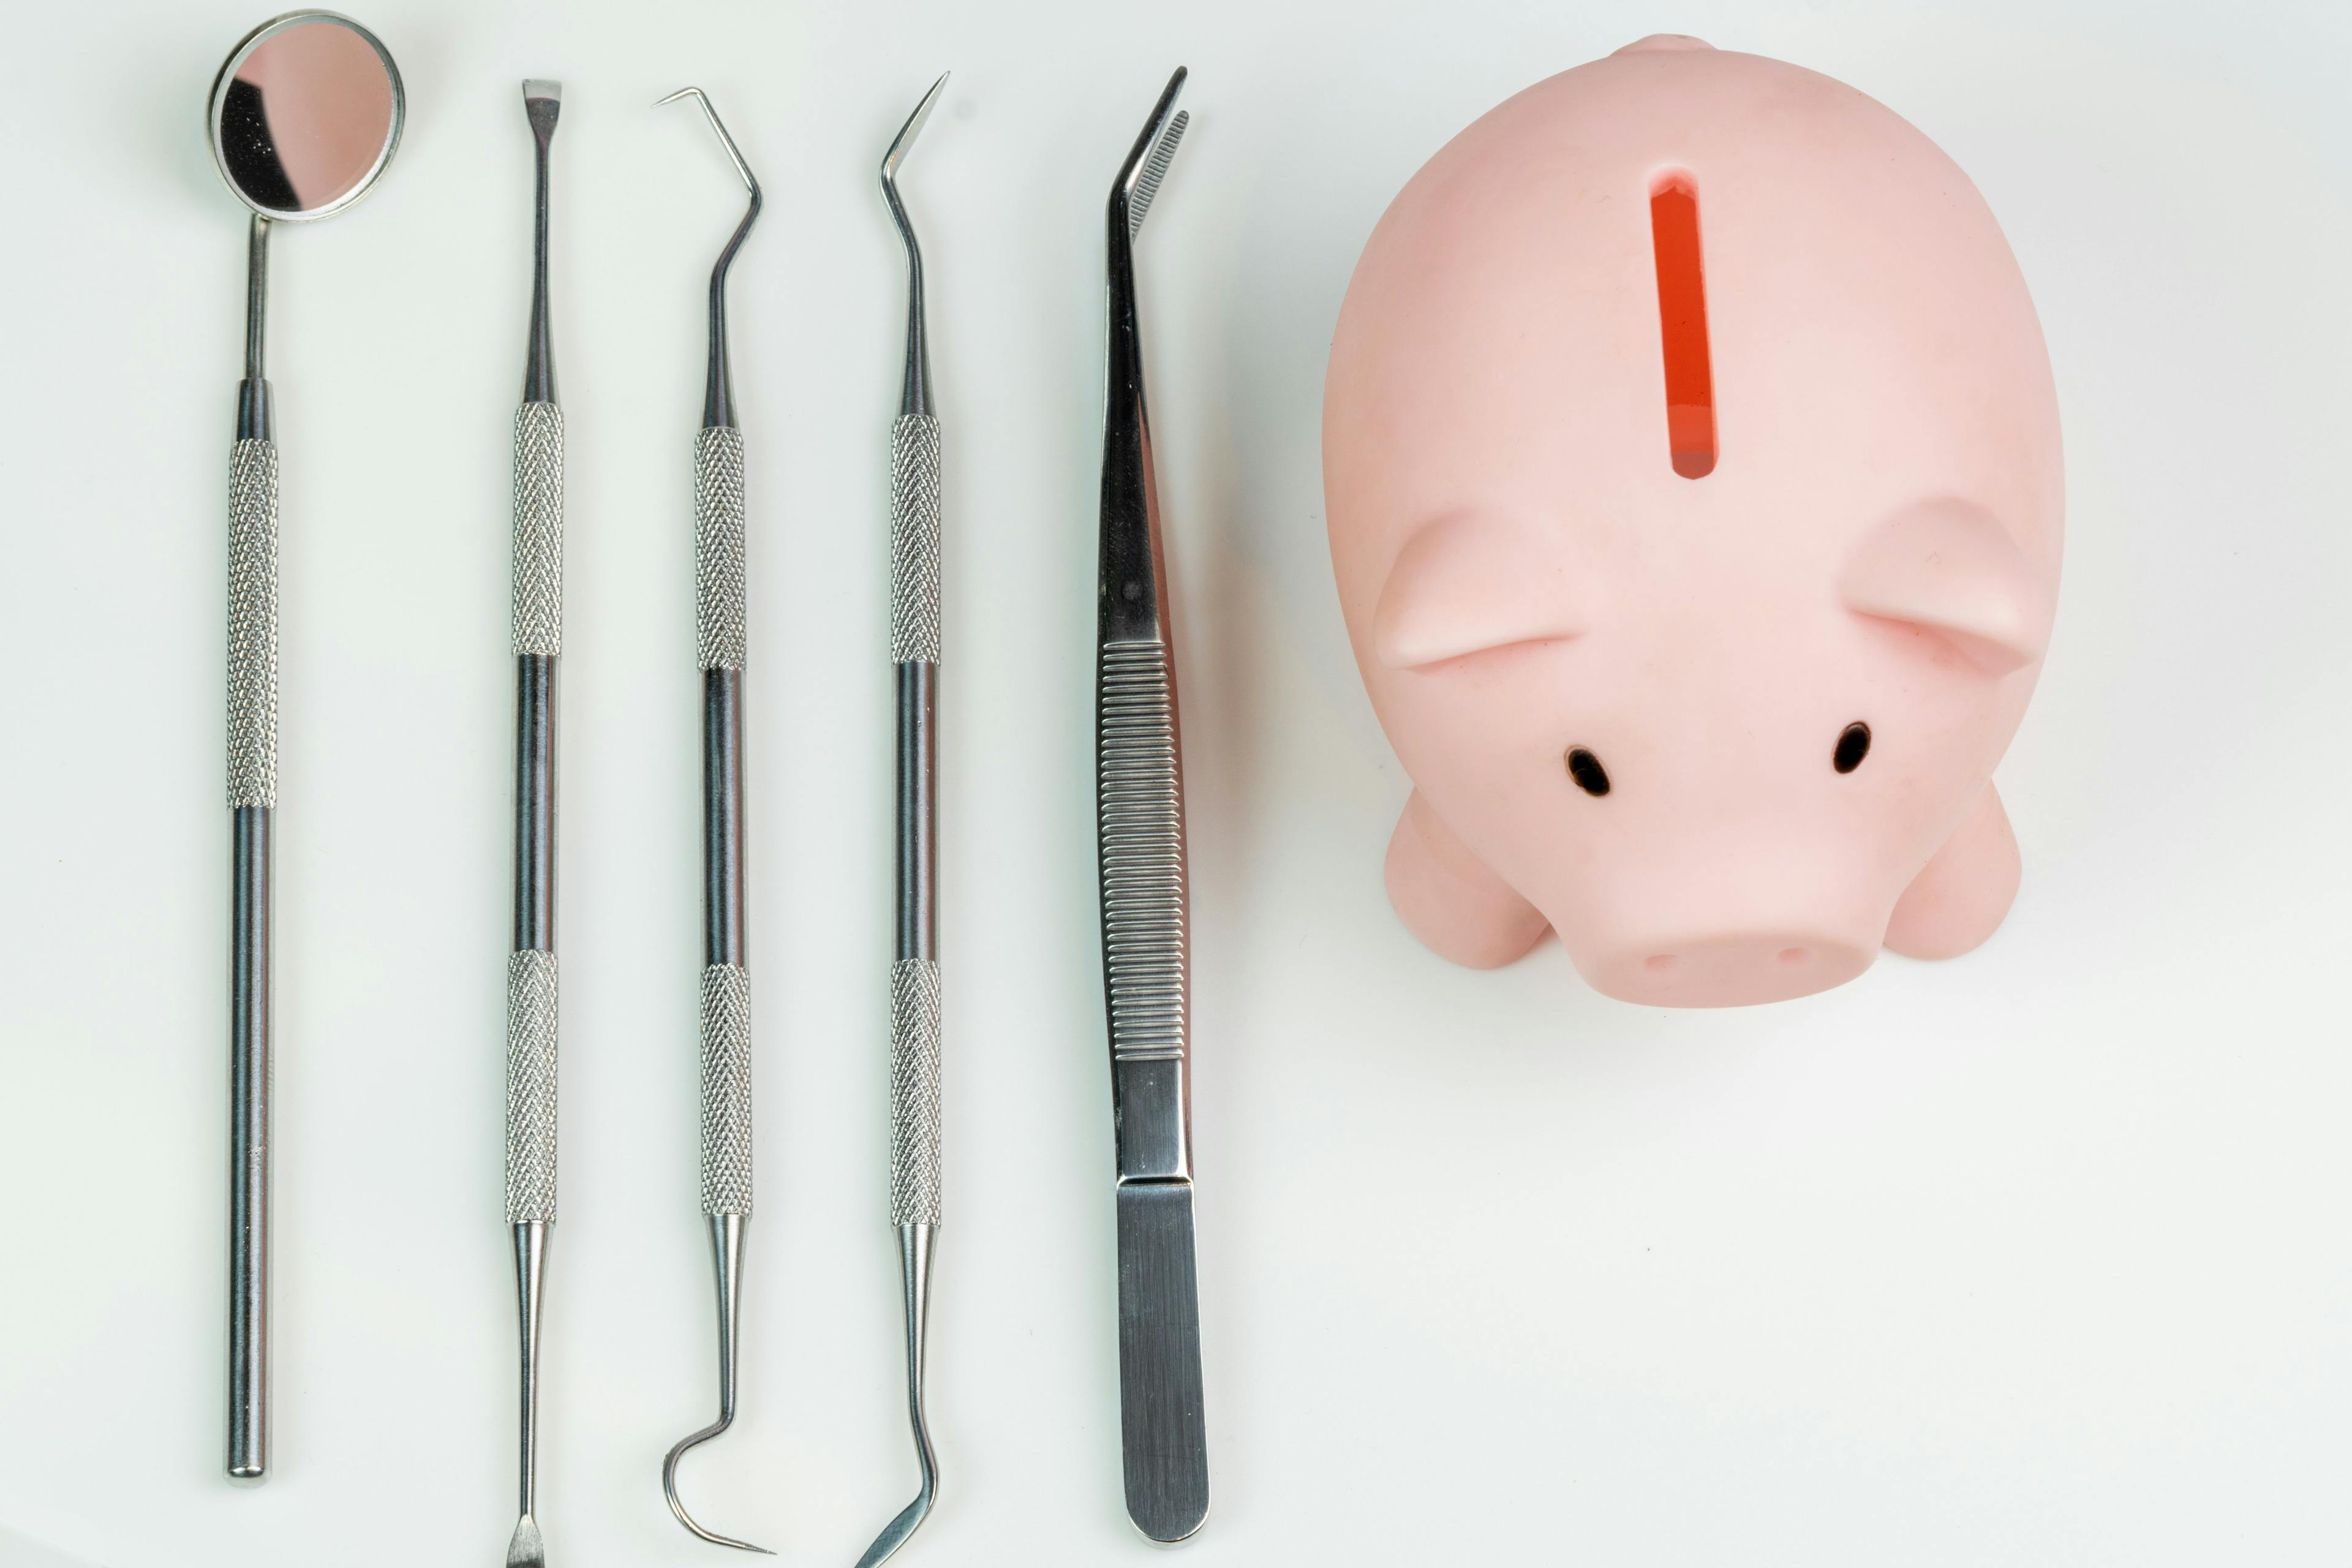 piggy bank with dentist tools isolated on white background: Image Credit: © Hector - ©Hector - stock.adobe.com.